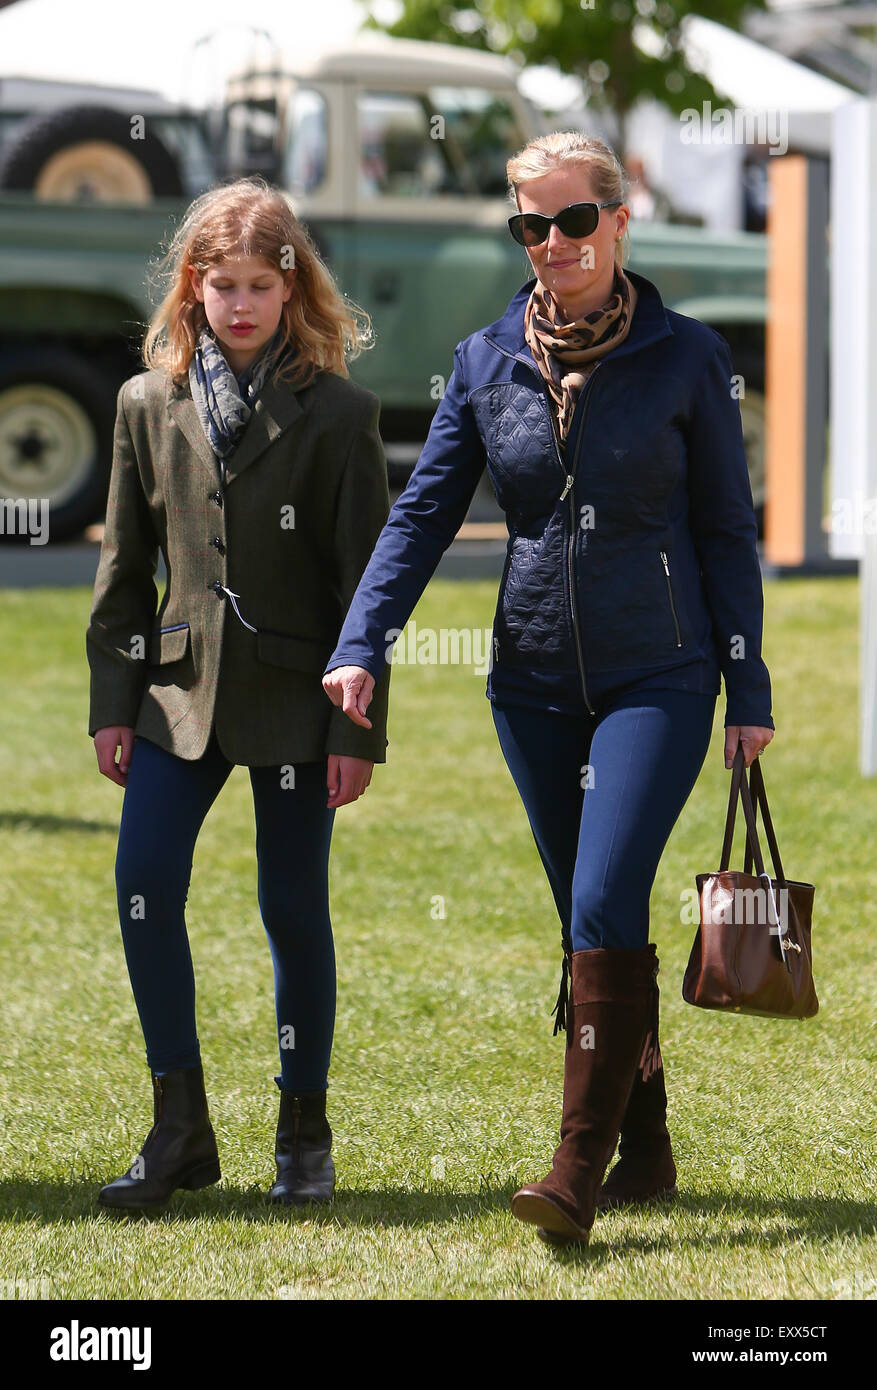 royal-windsor-horse-show-day-4-the-earl-and-countess-of-wessex-attend-EXX5CT.jpg